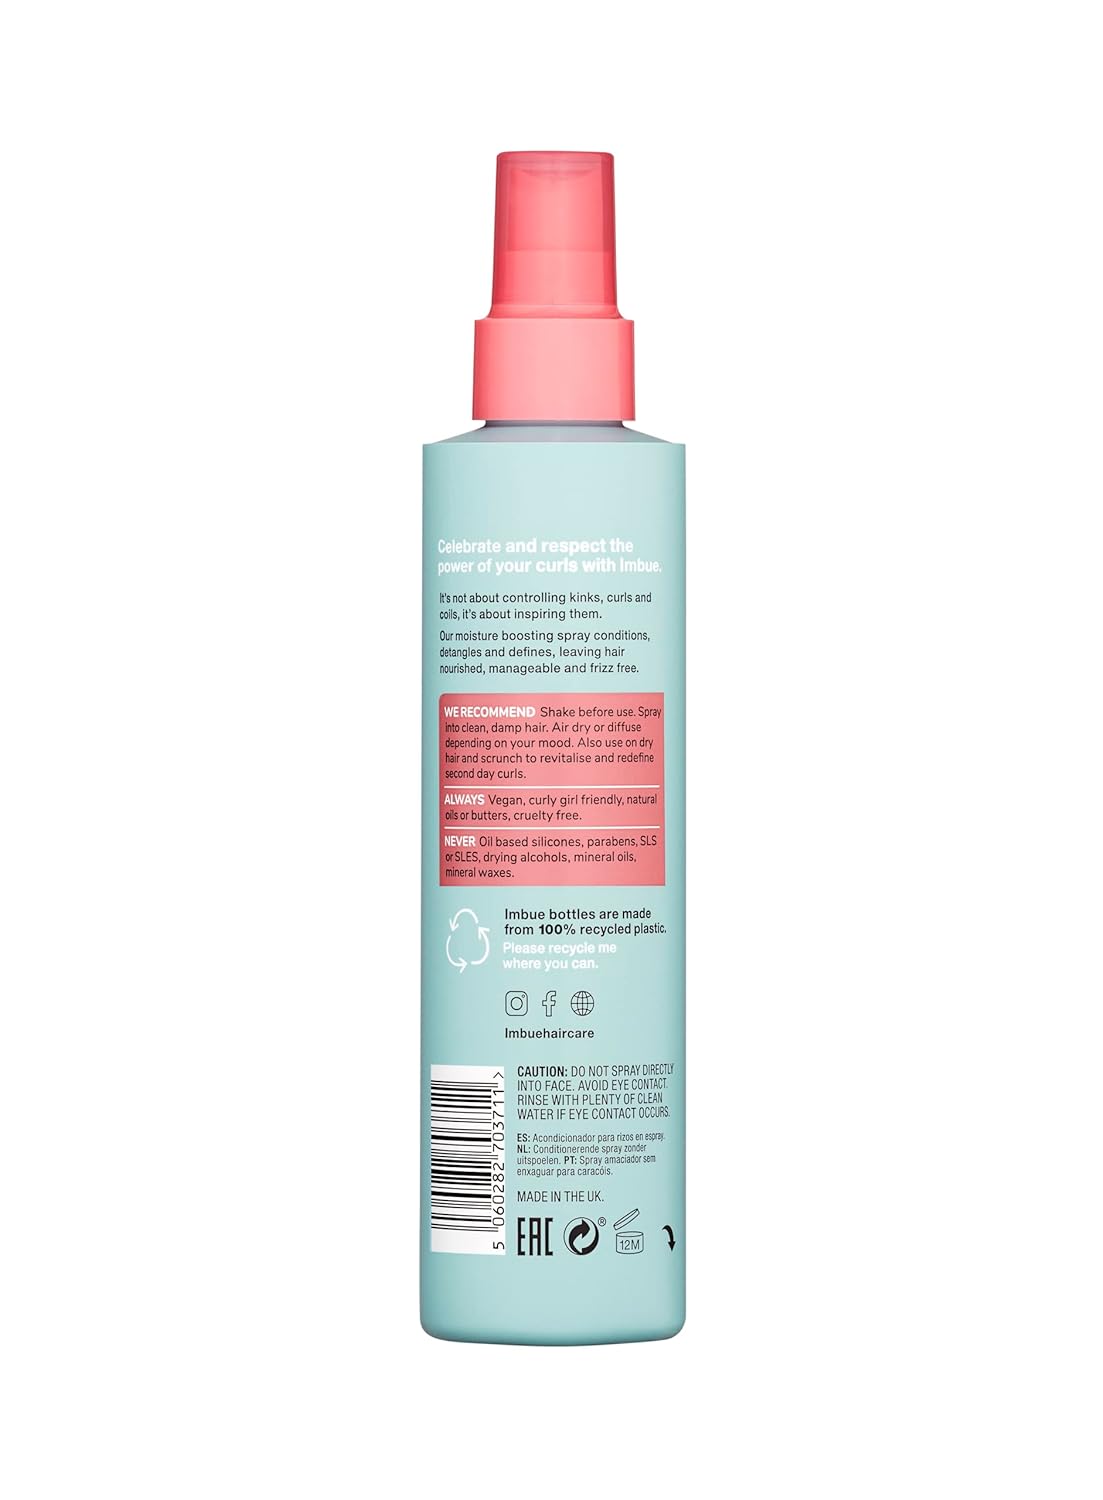 Imbue Curl Inspiring Hair Conditioning Leave In Spray, Treatment For Curly Hair, Frizz Control | Hair Leave in Conditioner For Dry, Damaged Curls | Curly Girl Compliant, Vegan 6.7 fl oz, Coconut Oil : Beauty & Personal Care